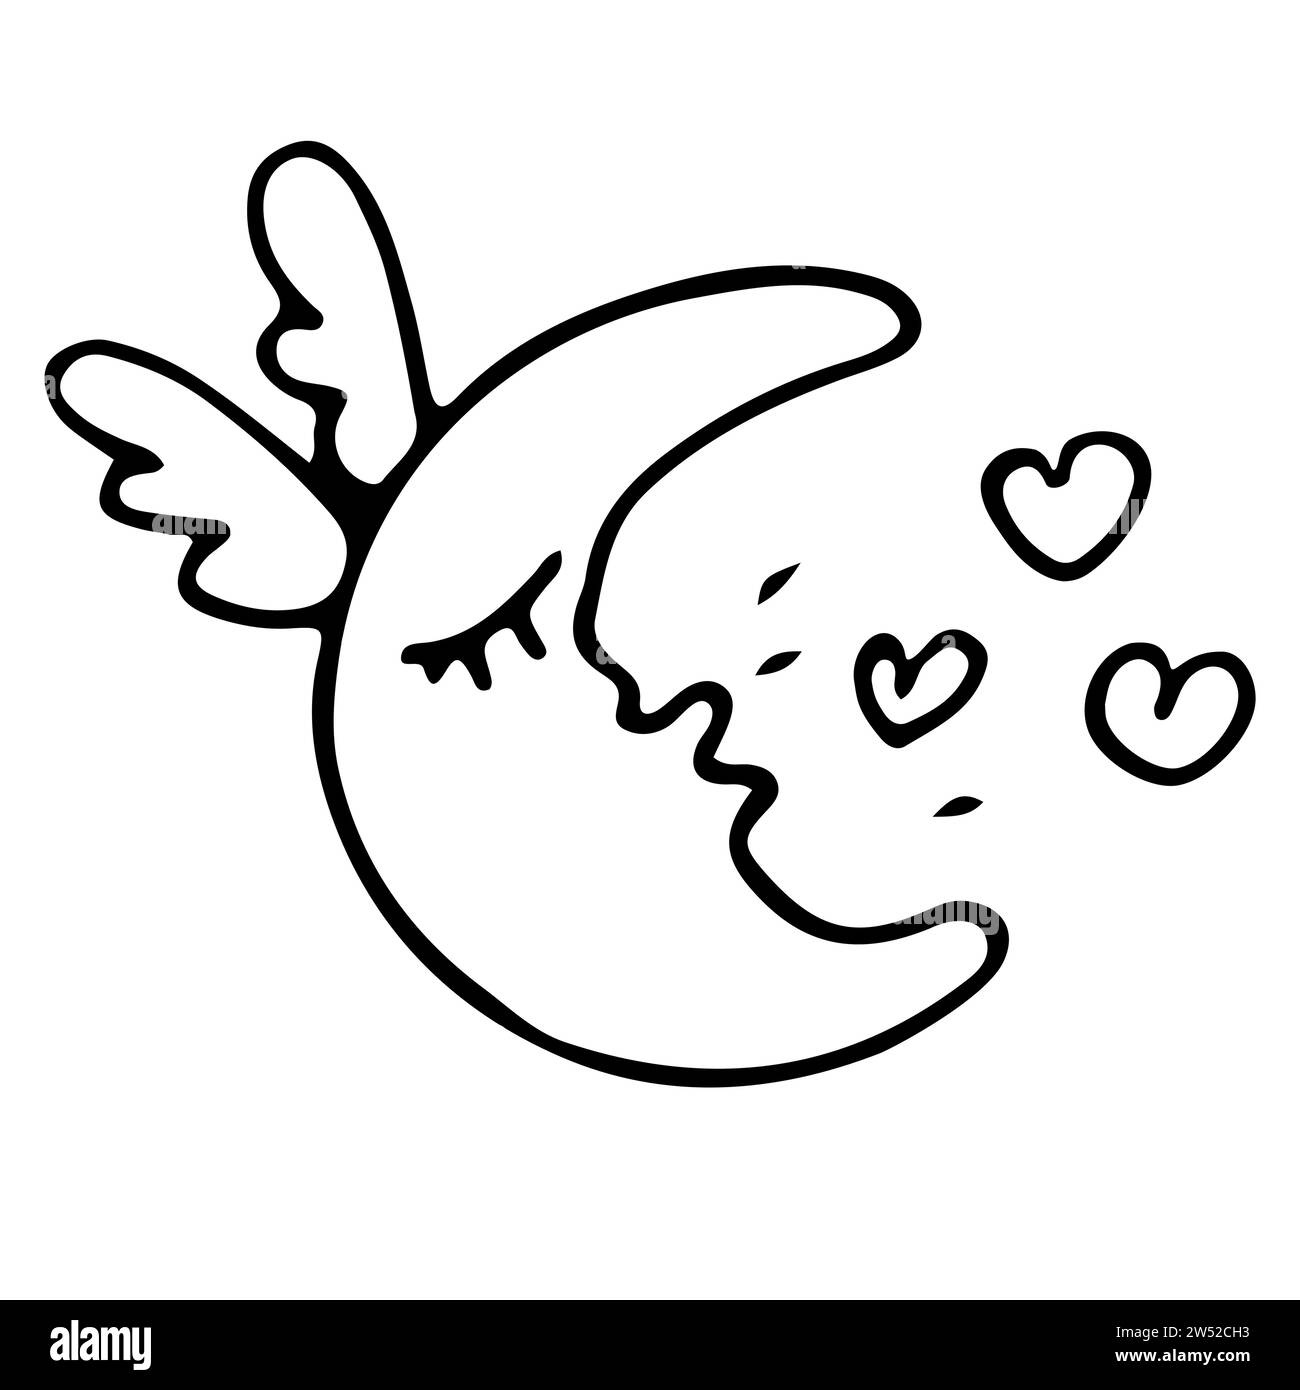 The winged moon kisses and hearts fly around. Vector sketch for Valentine's Day. Оutline doodle illustrates love, joy, fun. Stock illustration isolate Stock Vector